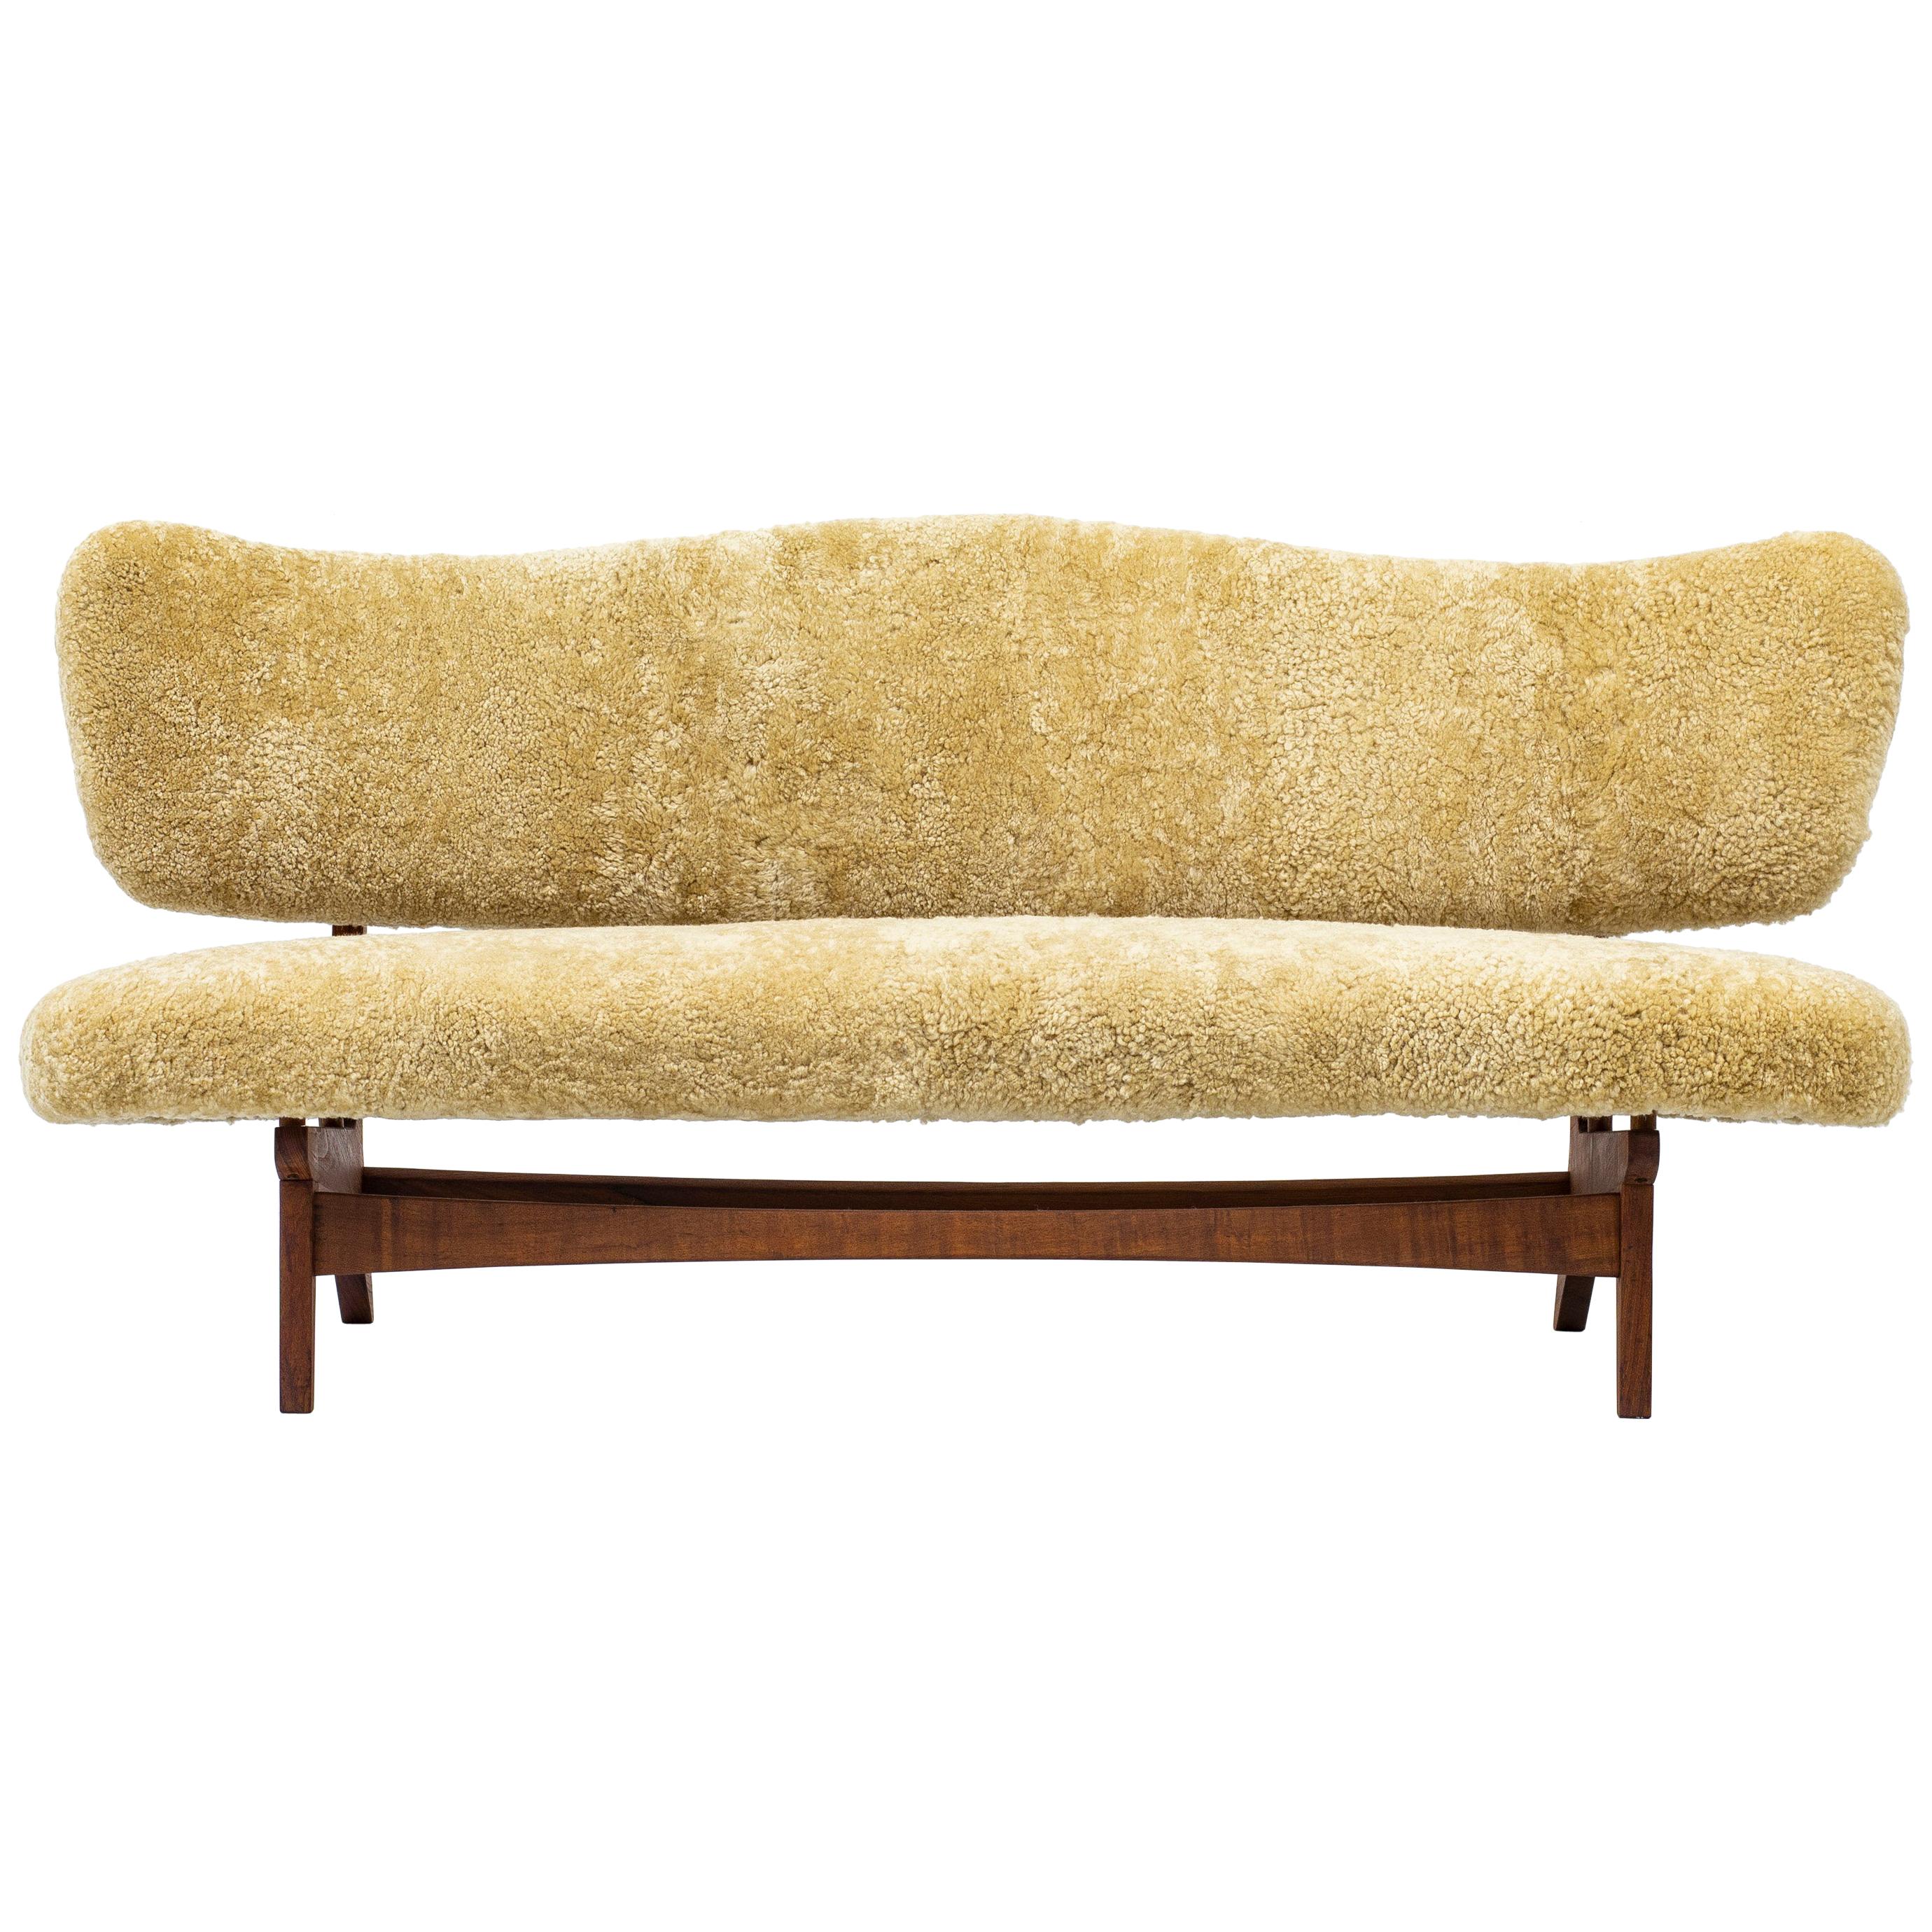 Rare Sofa in Sheep Skin by Sigurd Resell for Rastad & Relling, Norway, 1950s